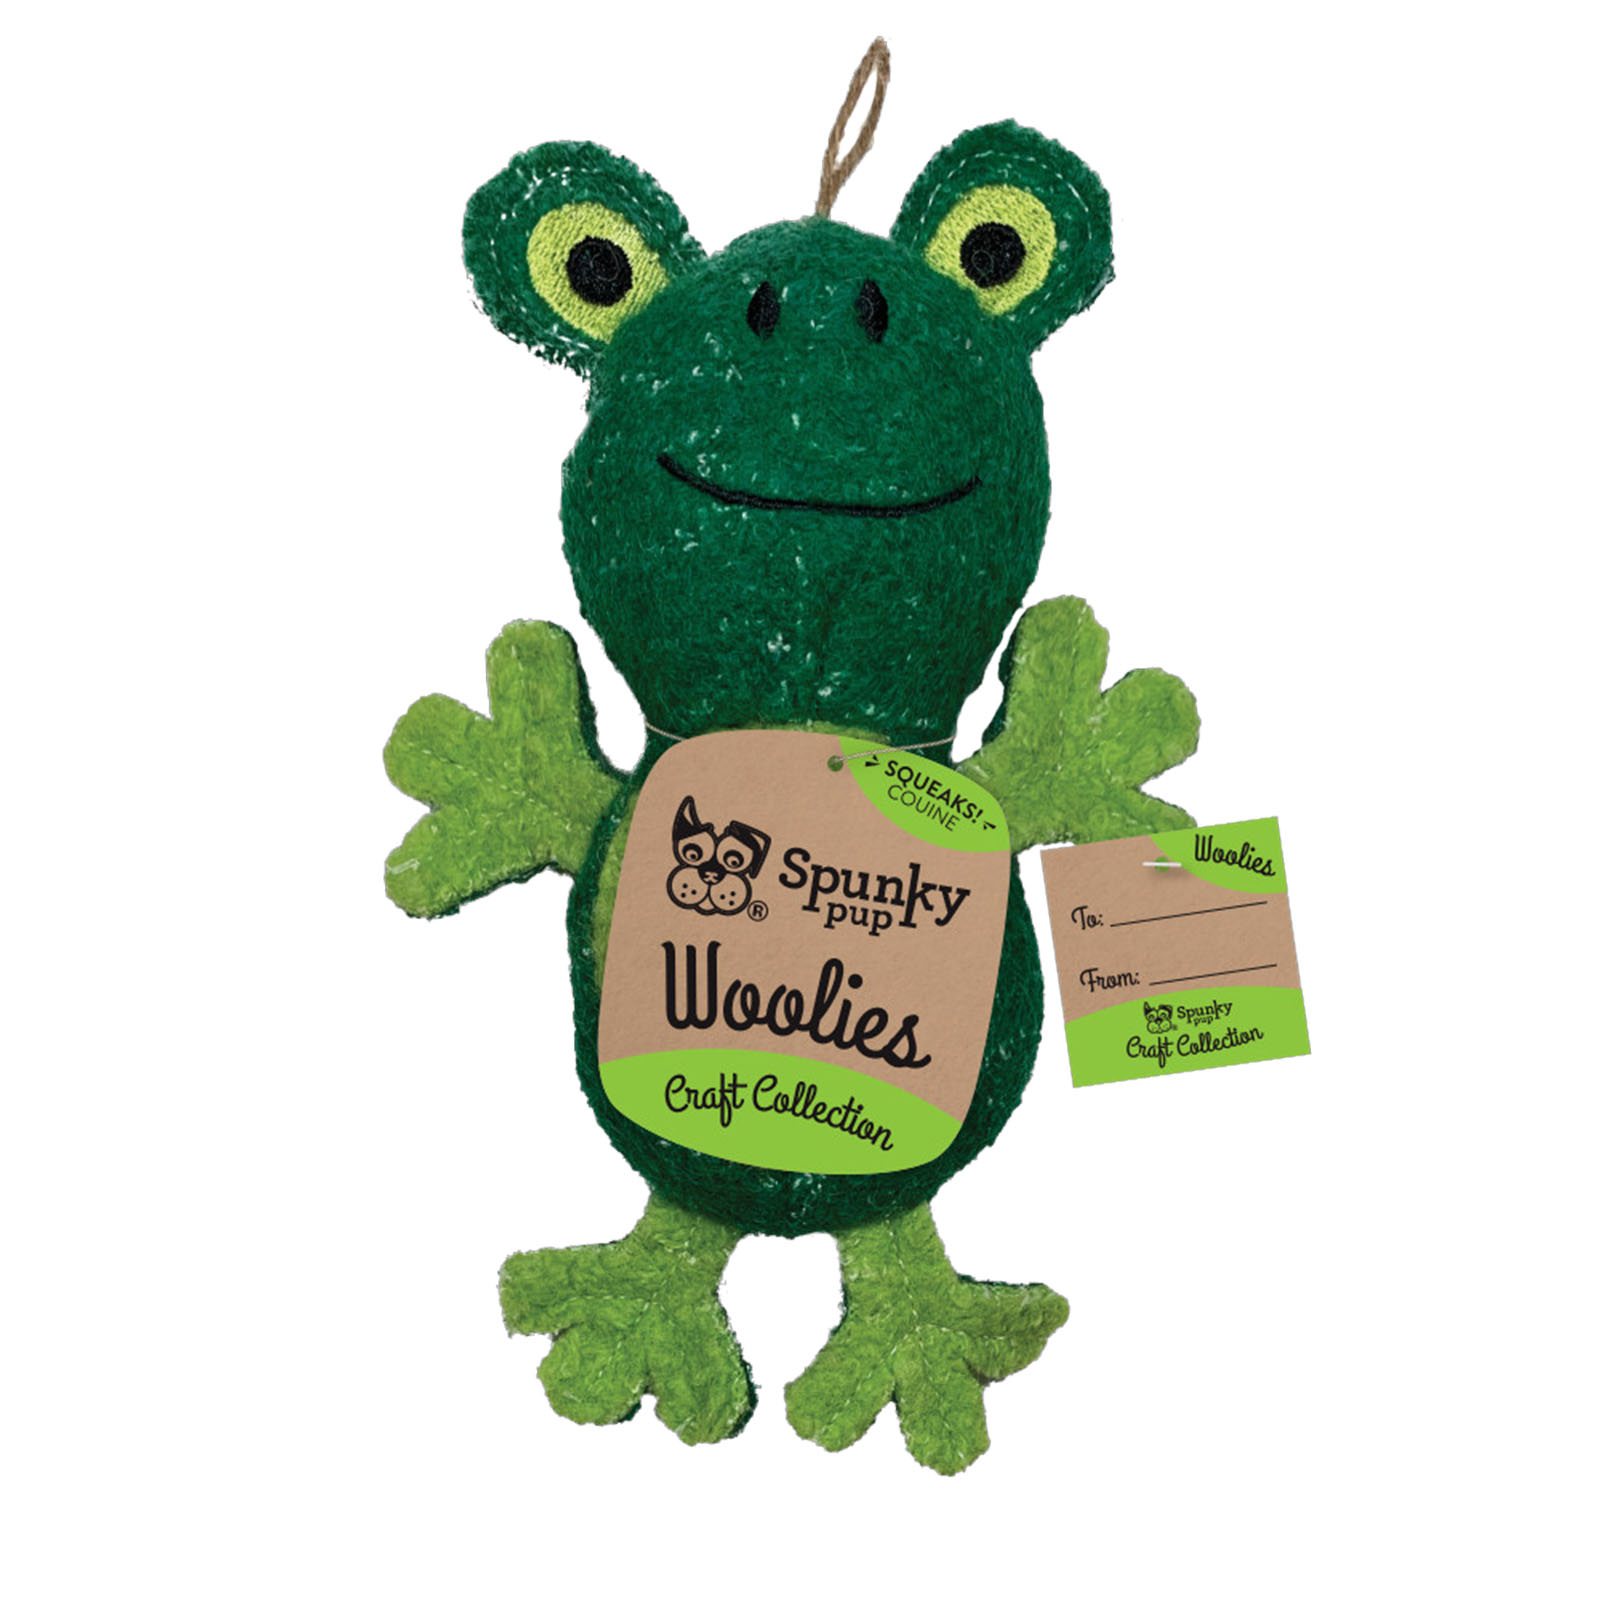 Spunky Pup Woolies Mini Frog Plush Squeak Toy For Dogs - $15.81